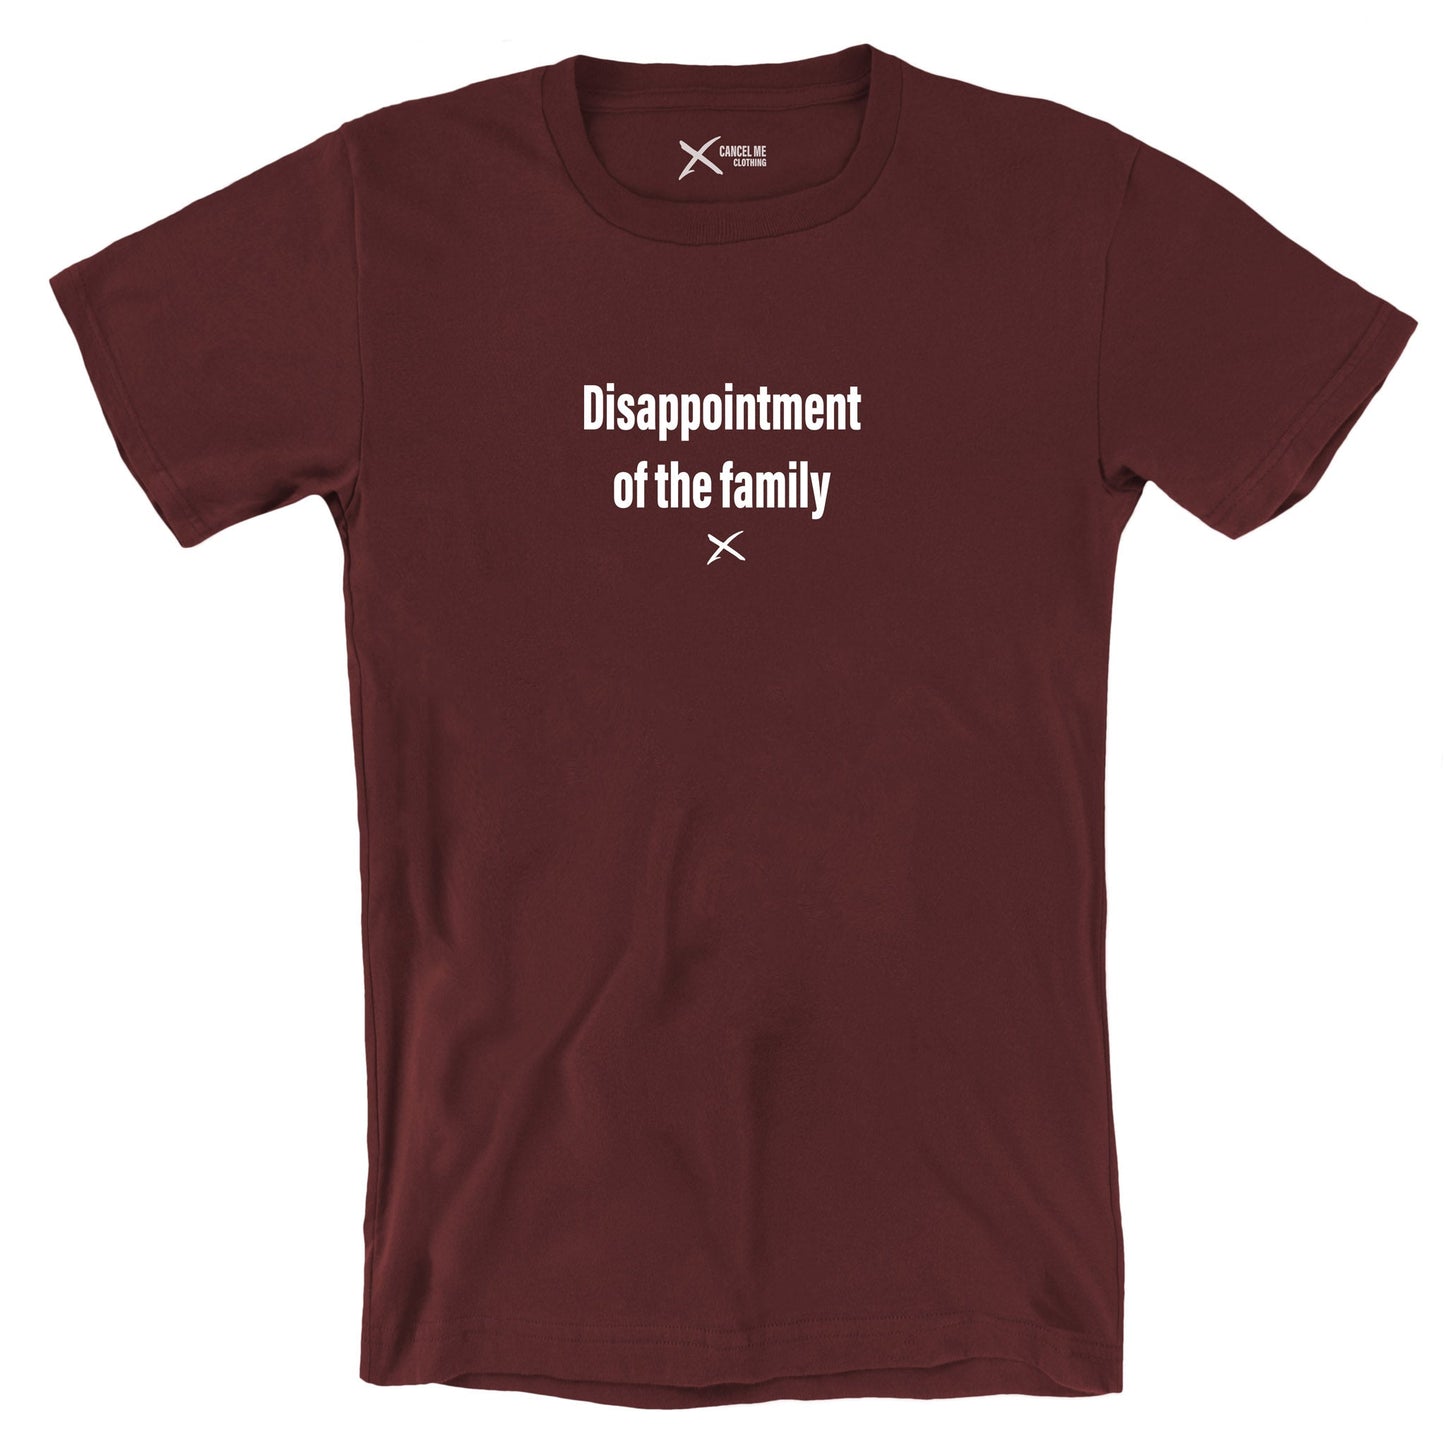 Disappointment of the family - Shirt